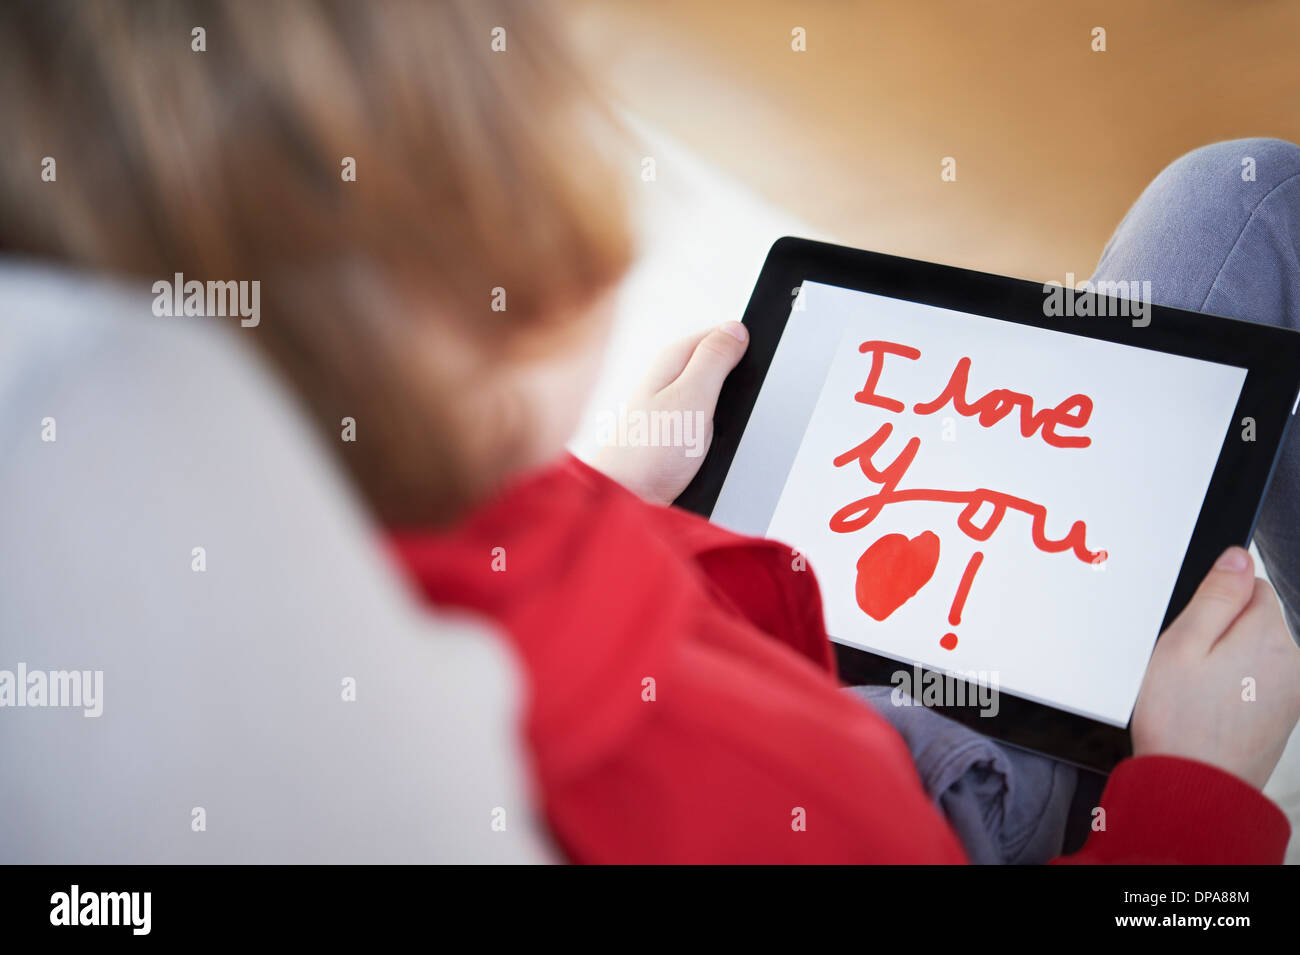 Rear view of boy holding tablet saying 'I love you' Stock Photo